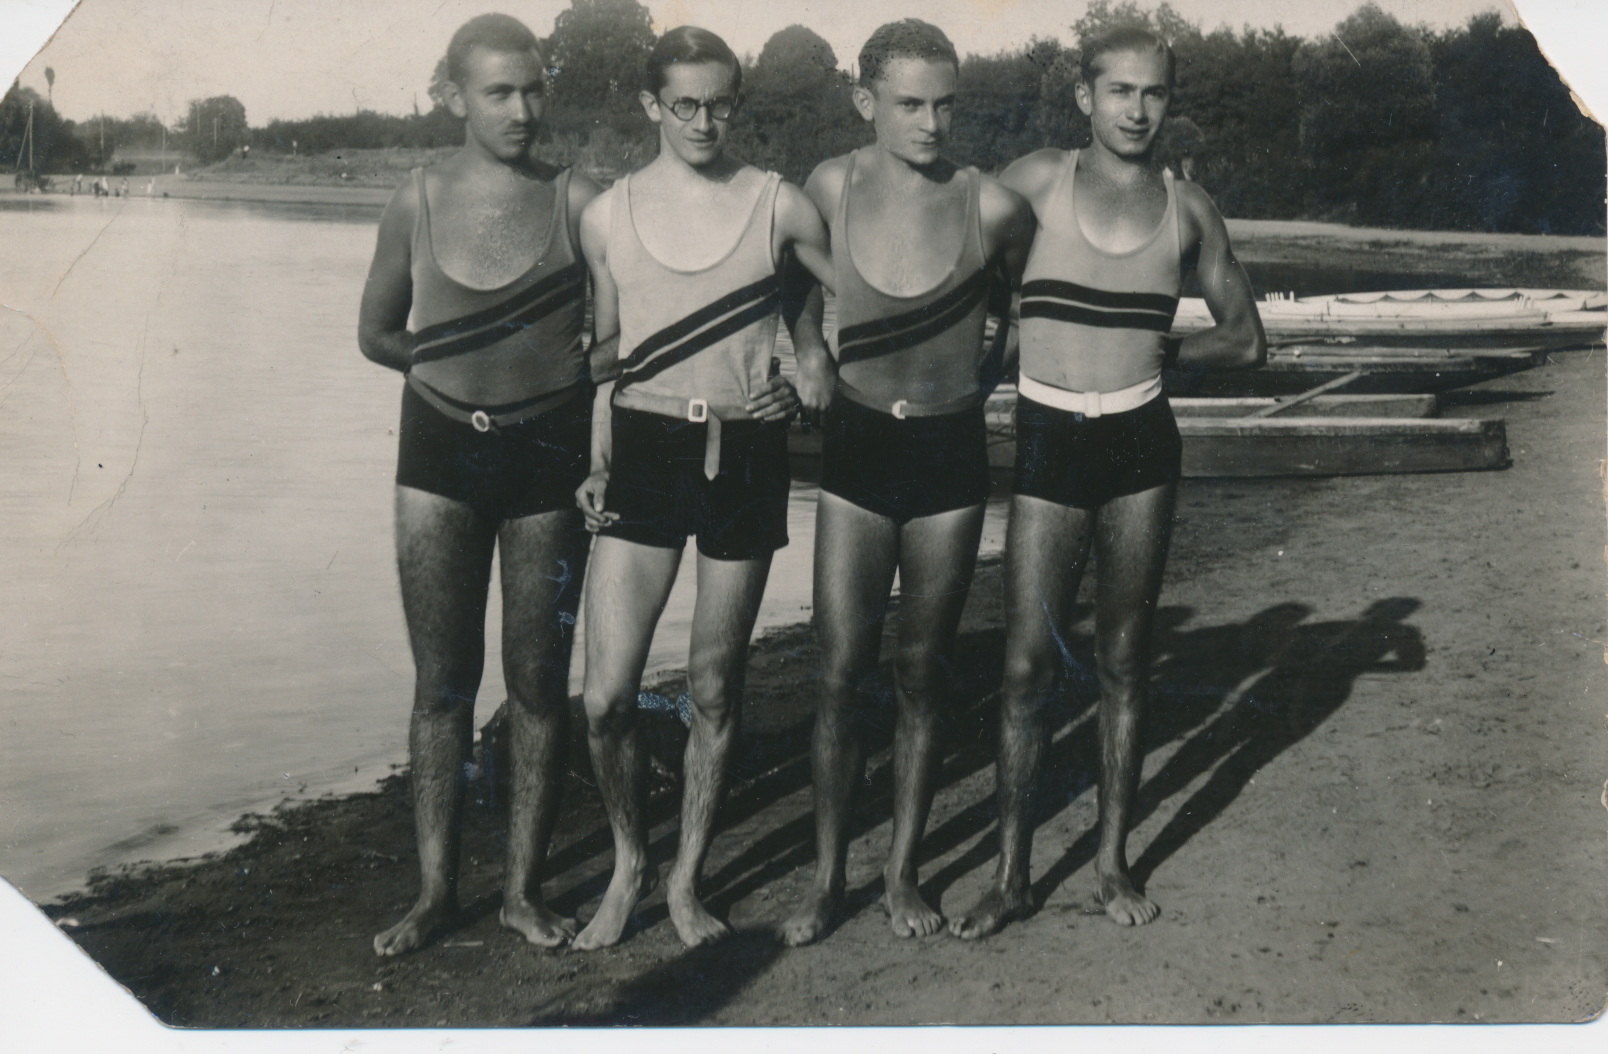 Miklos, my grandfather with friends